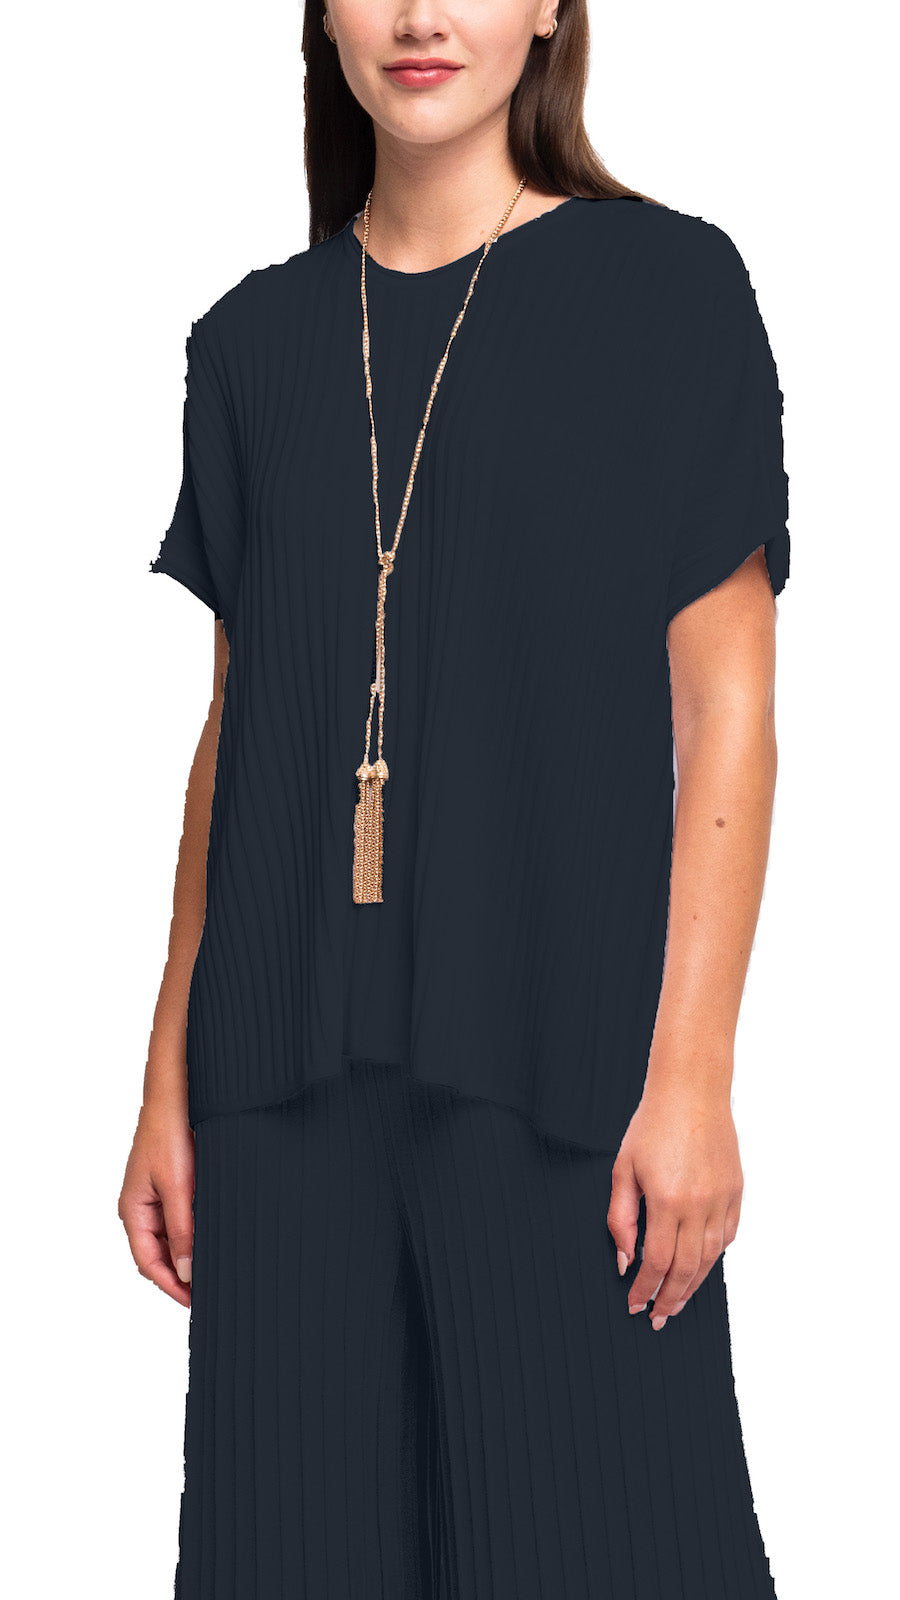 Black close-fitted dressy top for plus size women.